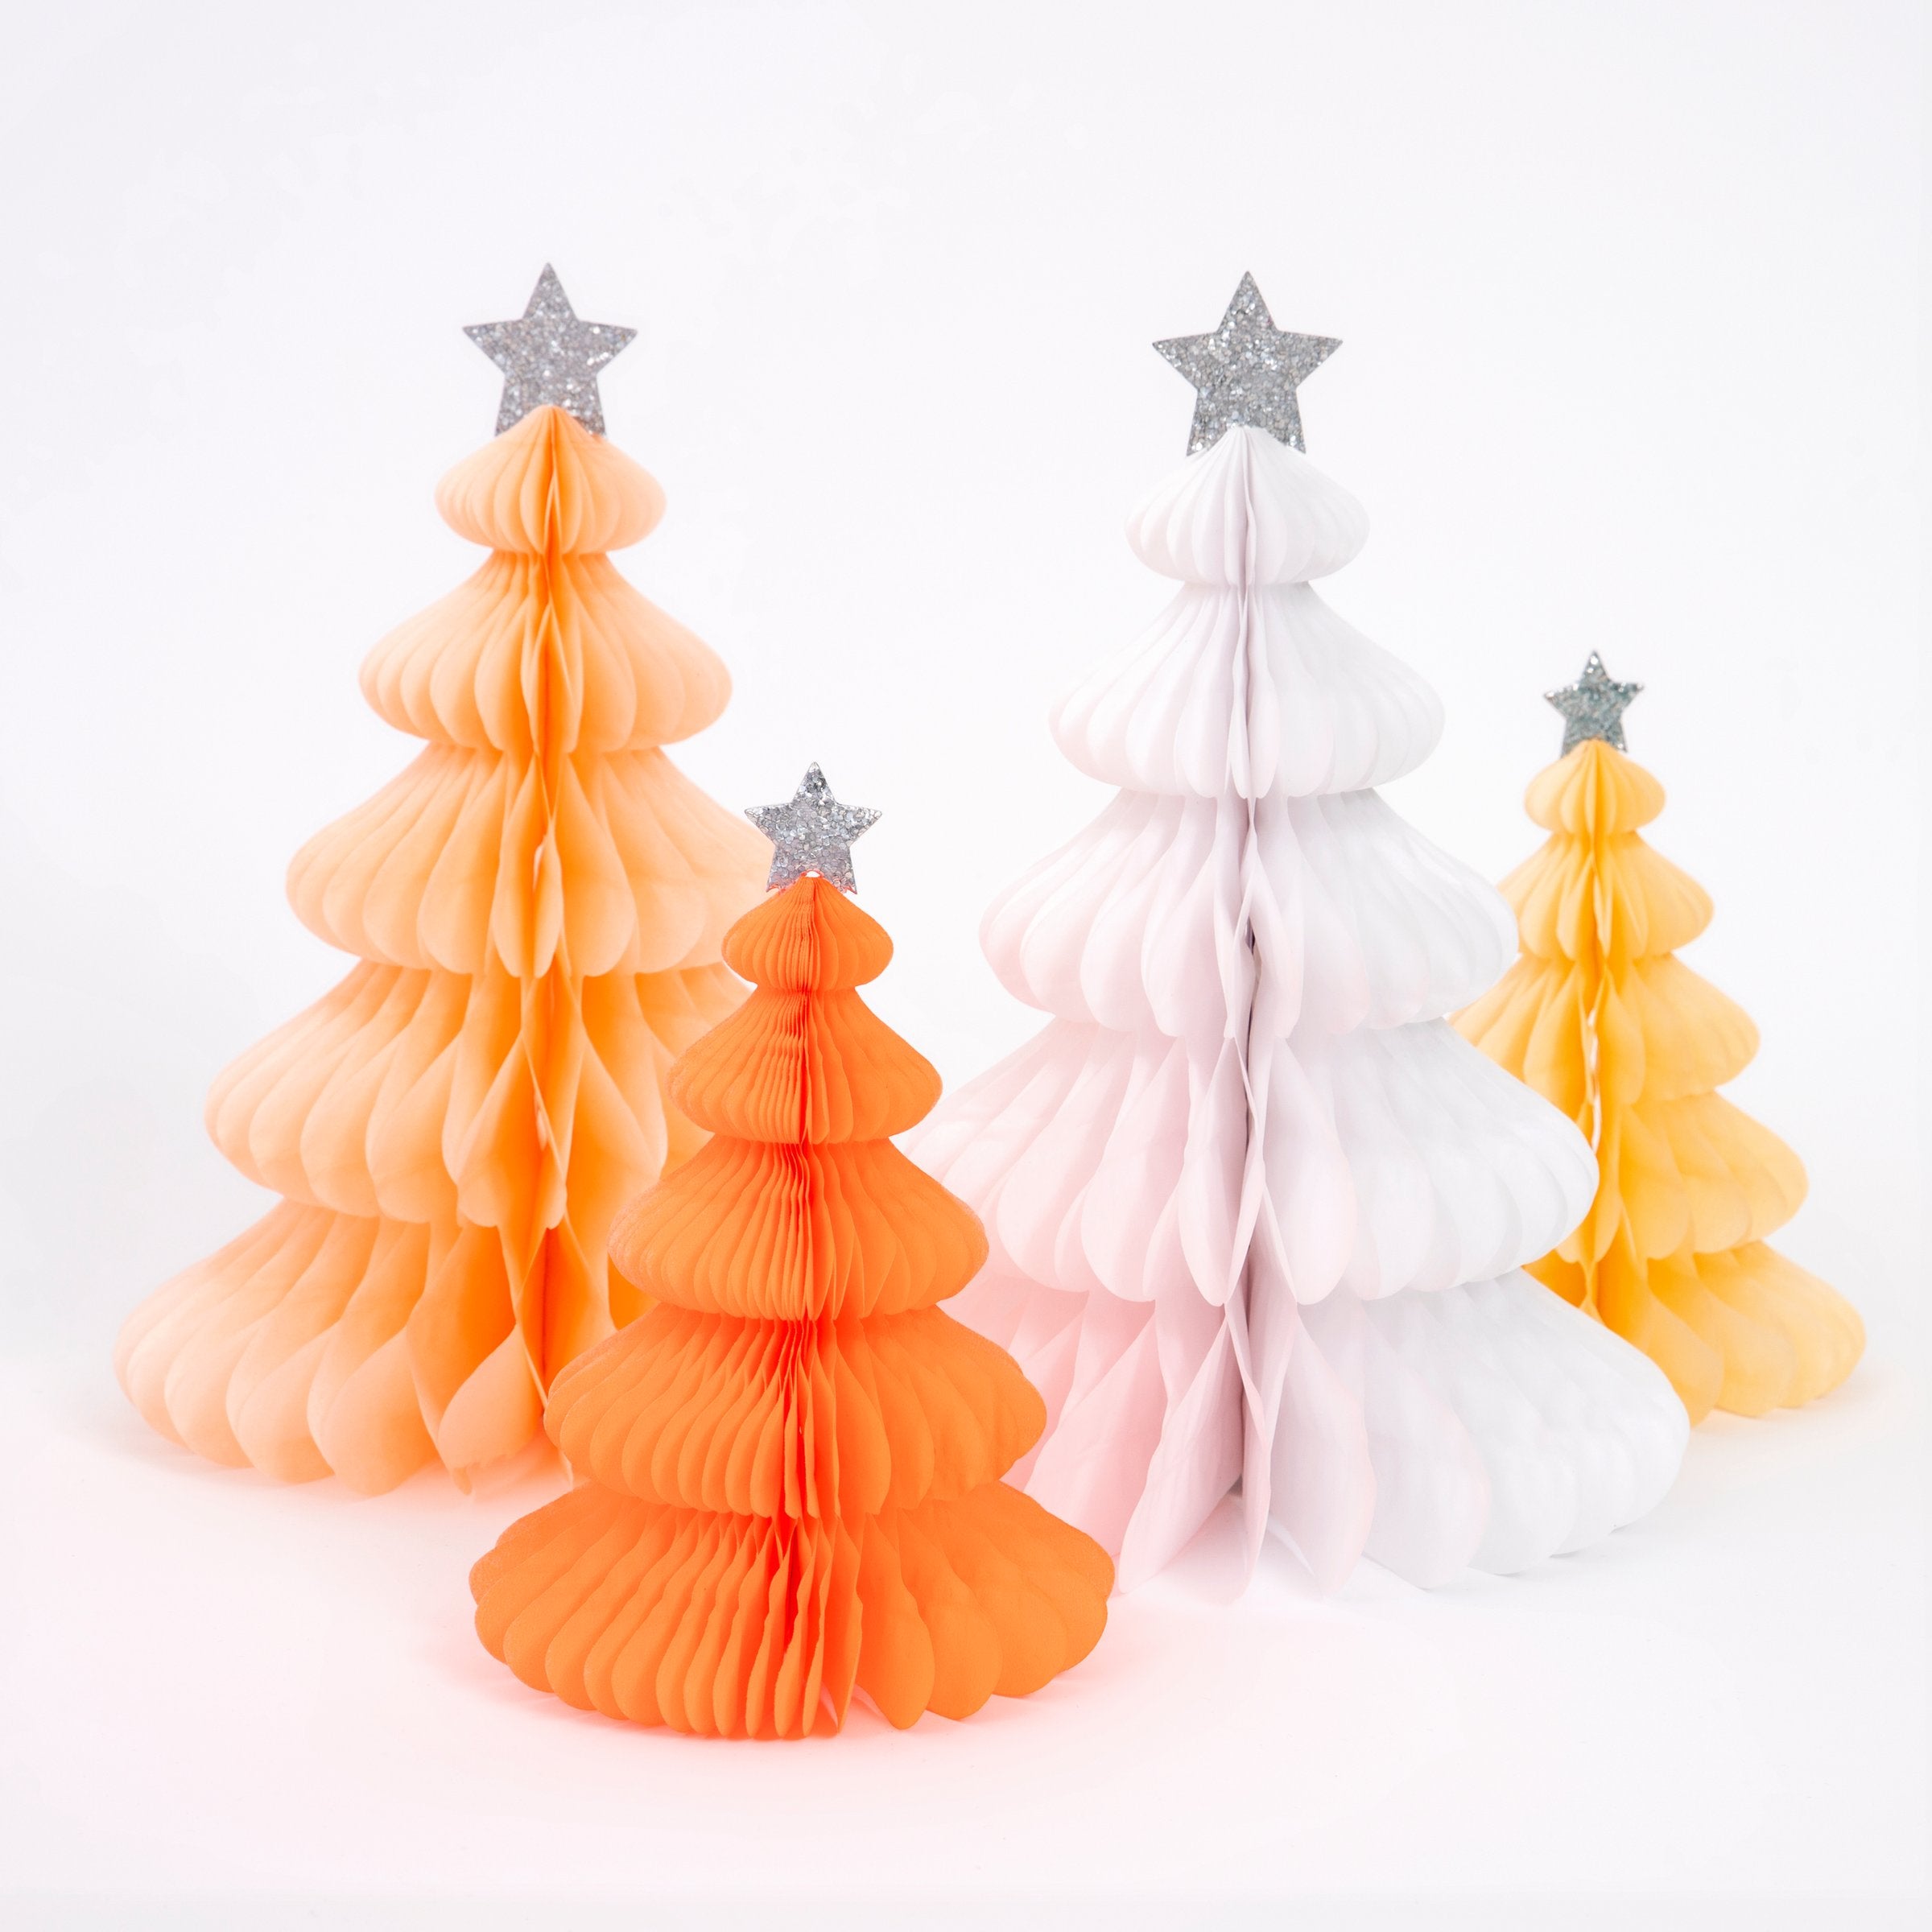 These beautiful honeycomb decorations are made from tissue paper with shining silver stars on top.